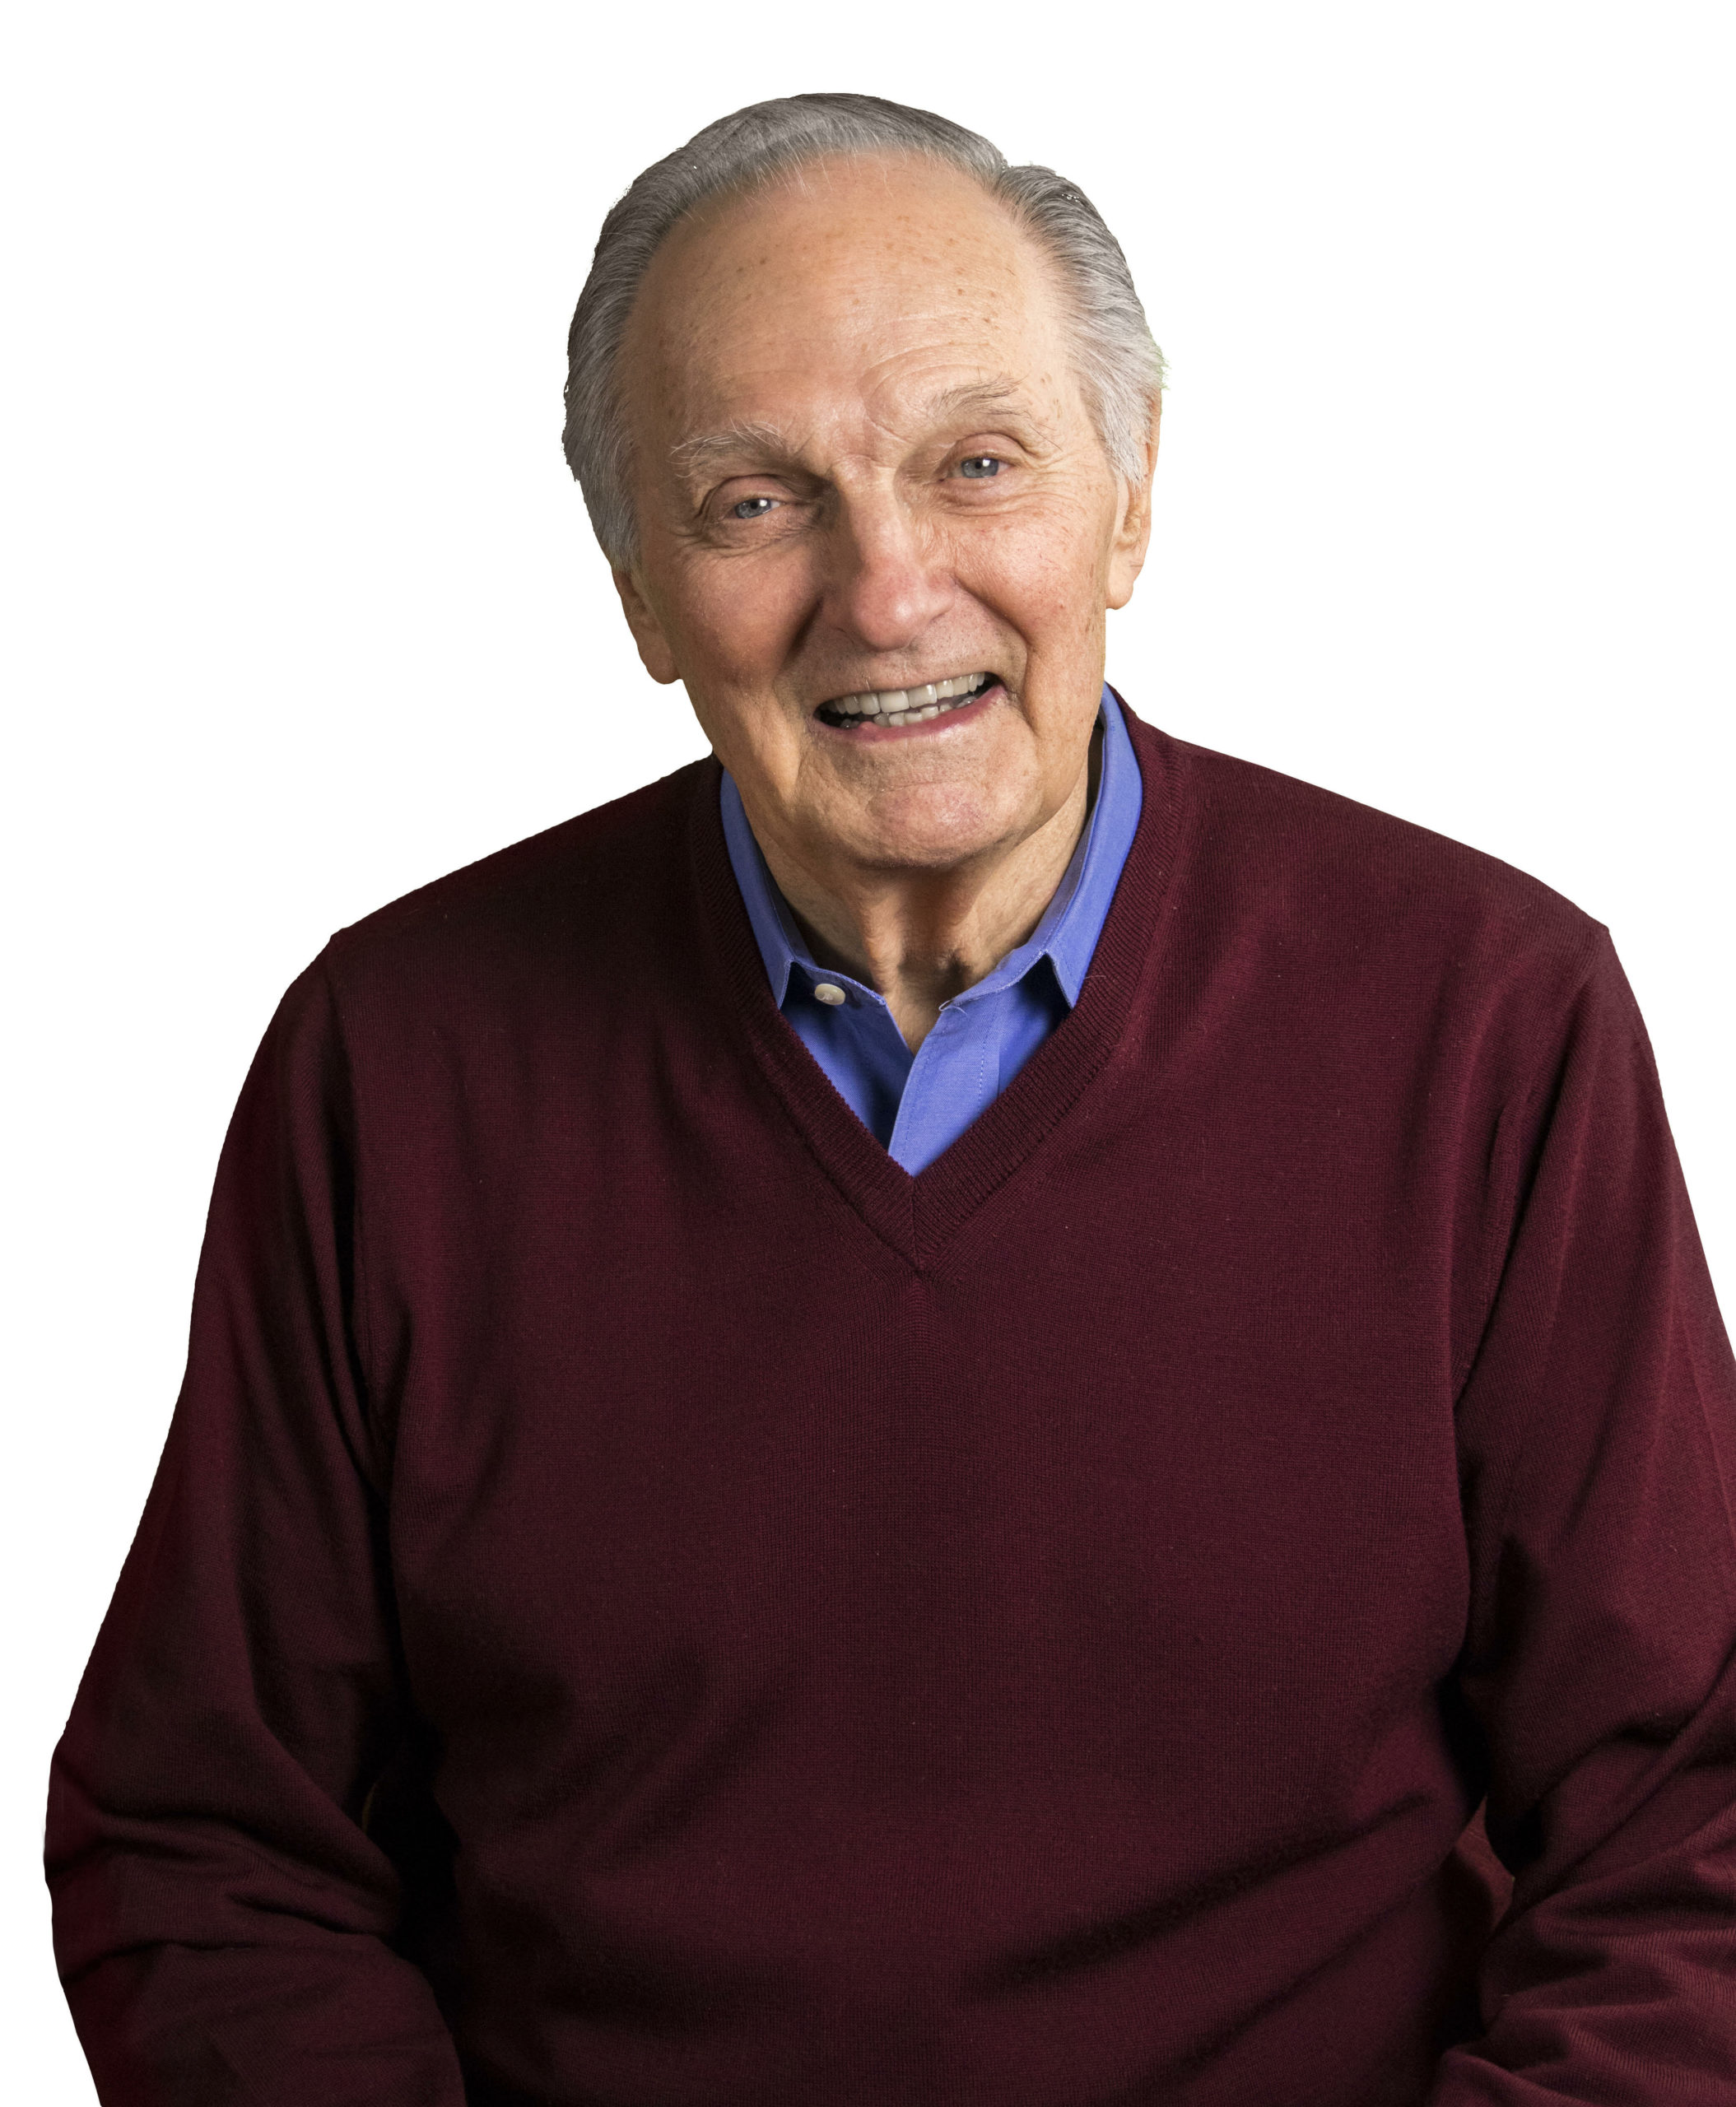 Alan Alda will offer narration to accompany Bach's Chaconne.